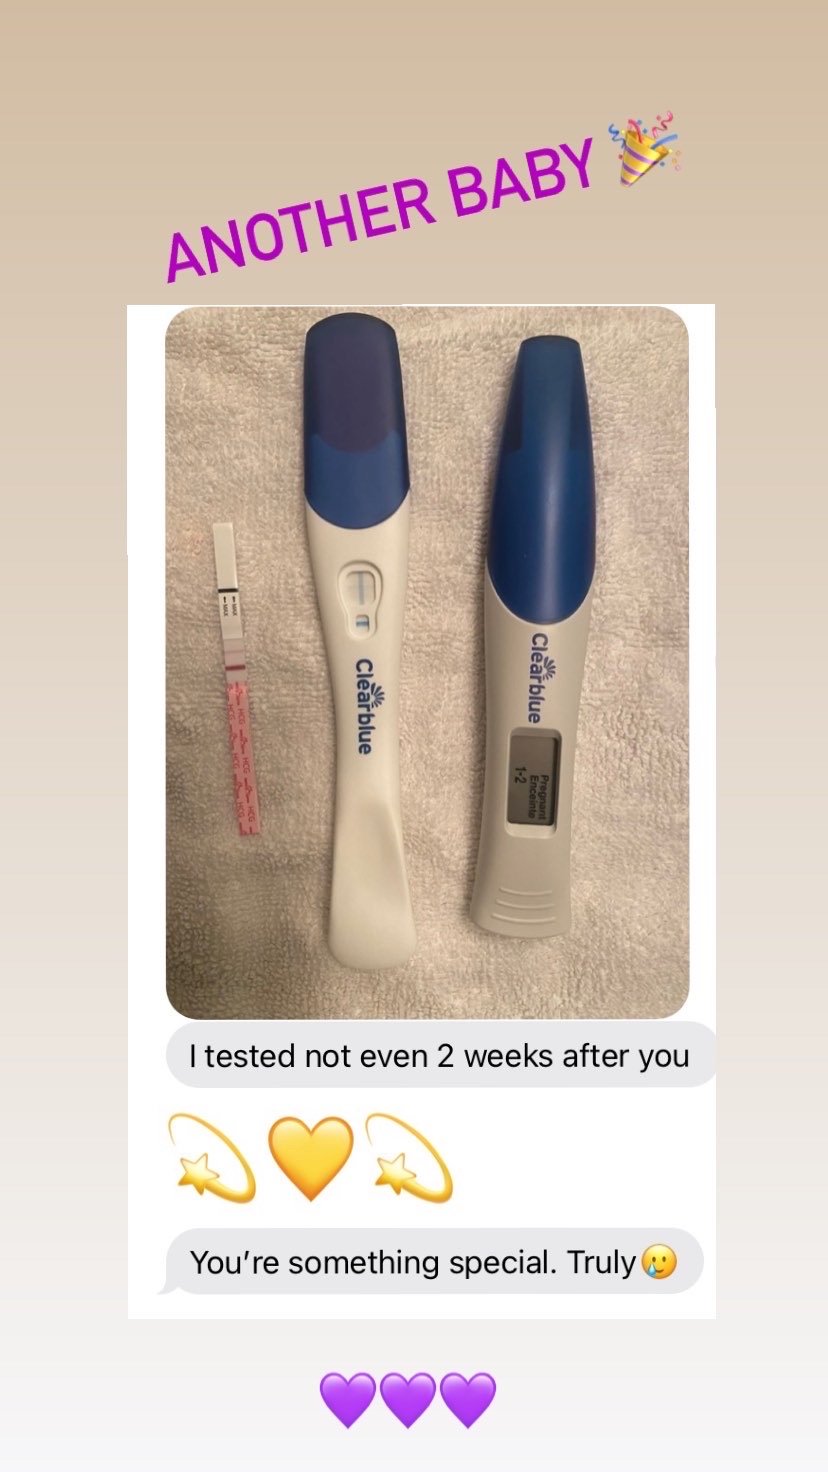  SuJok acupuncture treatment based in Vancouver at Alla Ozerova acupuncture clinic used to treat Fertility. Picture of patient’s positive pregnancy test.  Fertility clinic, fertility support, pregnancy maintenance, preventing miscarriage, abortion hi